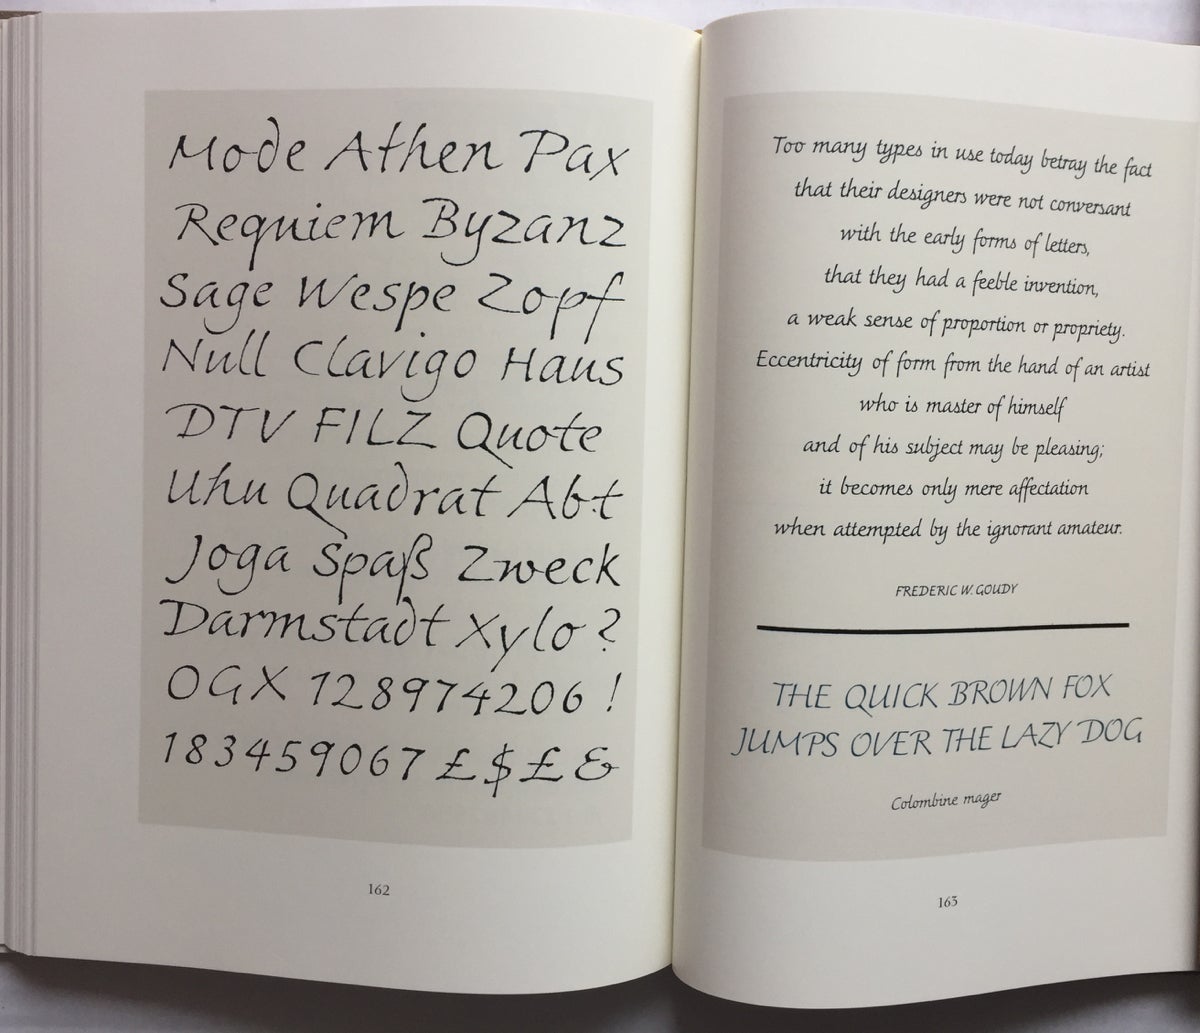 GUDRUN ZAPF VON HESSE. Bindings, Handwritten Books, Typefaces, Examples of Lettering and Drawings.